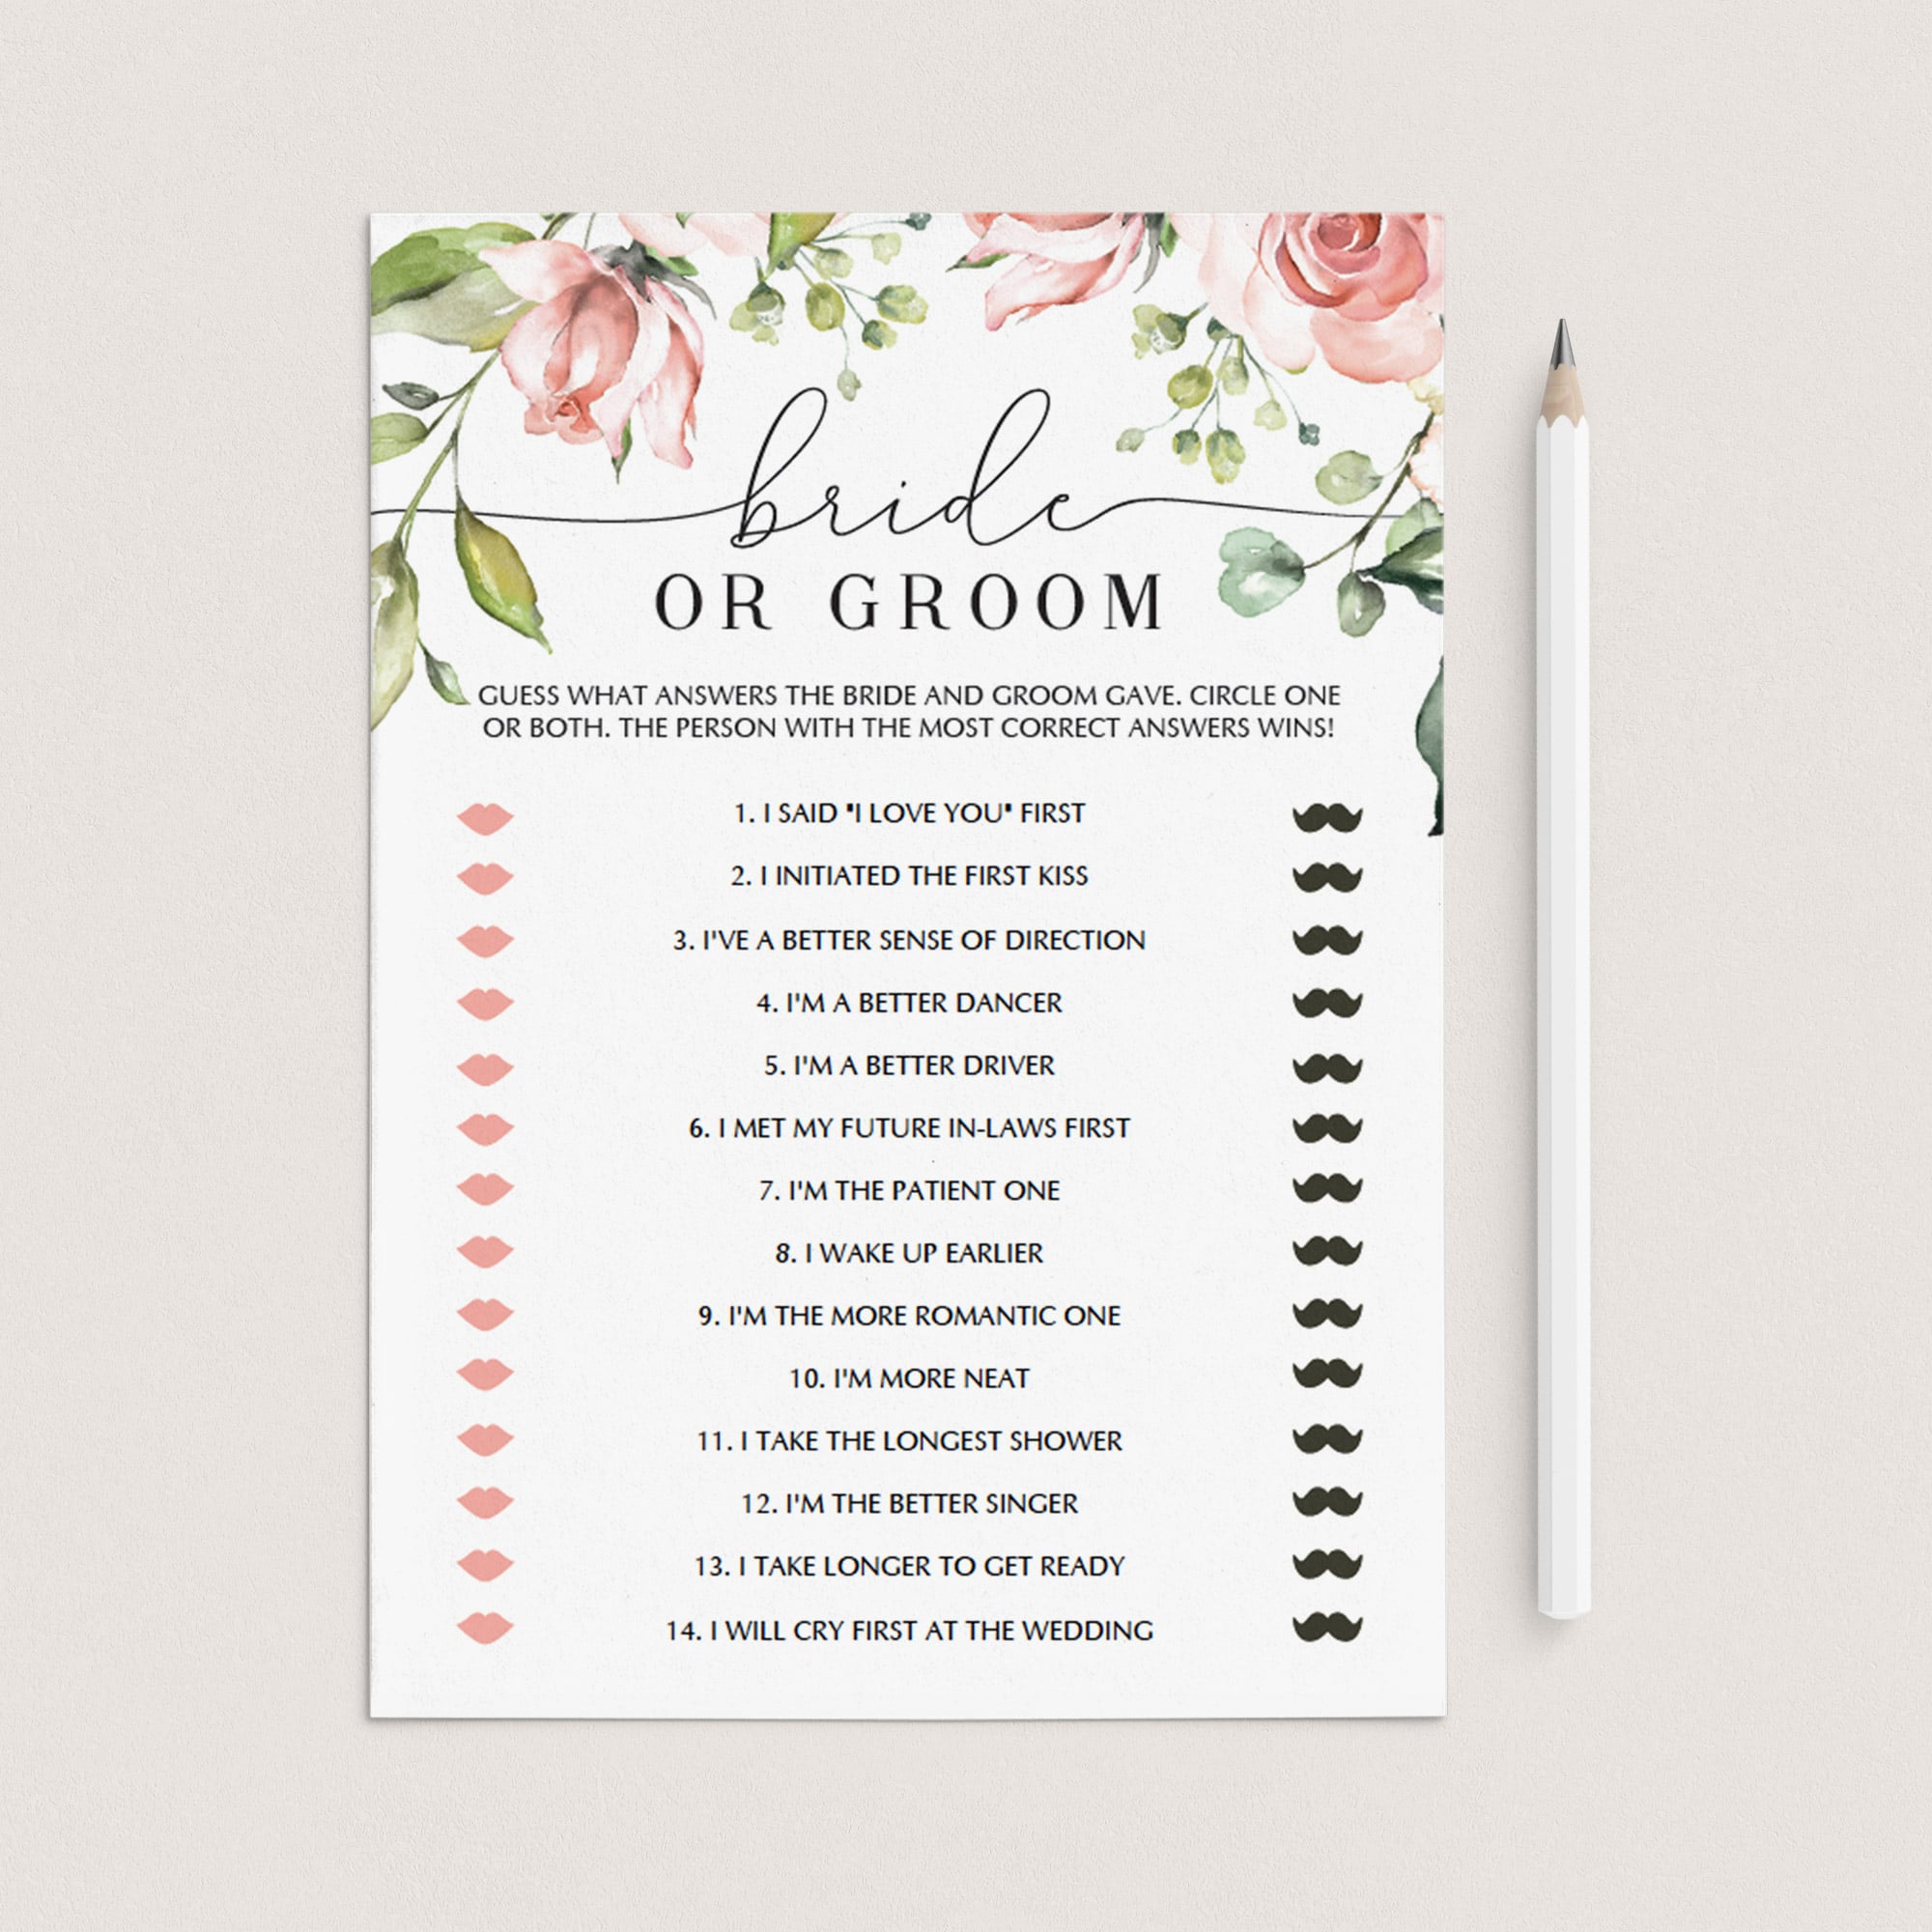 Editable bridal shower game templates by LittleSizzle